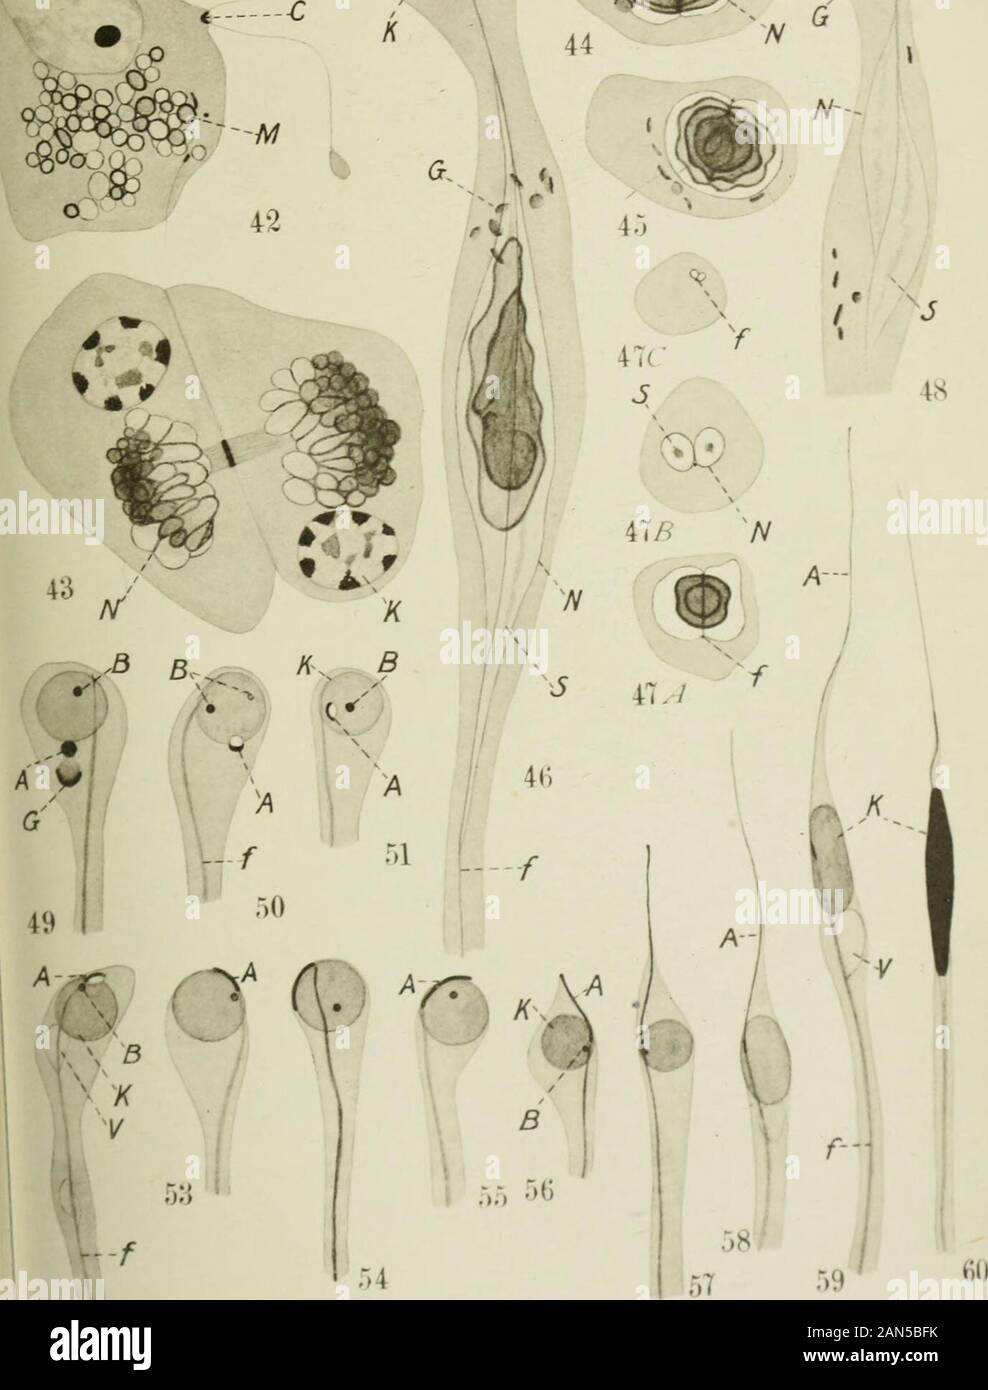 Quarterly journal of microscopical science . G. OX &gt; R.H.Bowen. del. On the Biology and Structure of the Larvaeof Hydrophilus caraboides L. ByE. N. Pavlovsky, 3I.D., D.Sc. Professor of Zoology at the Military Academy of Medicine, Petrograd. With Plate 27 and 16 Text-figures. In May 19LS I captured in the vicinity of Petrograd somecocoons of a hydrophilus beetle, one of which I kepi for breedingpurposes. On June 13 there emerged about fifty small larvaevery similar to Hydrophilus caraboides. These latterare characterized by the presence of a pair of lateral (pleural)appendages covered with a Stock Photo